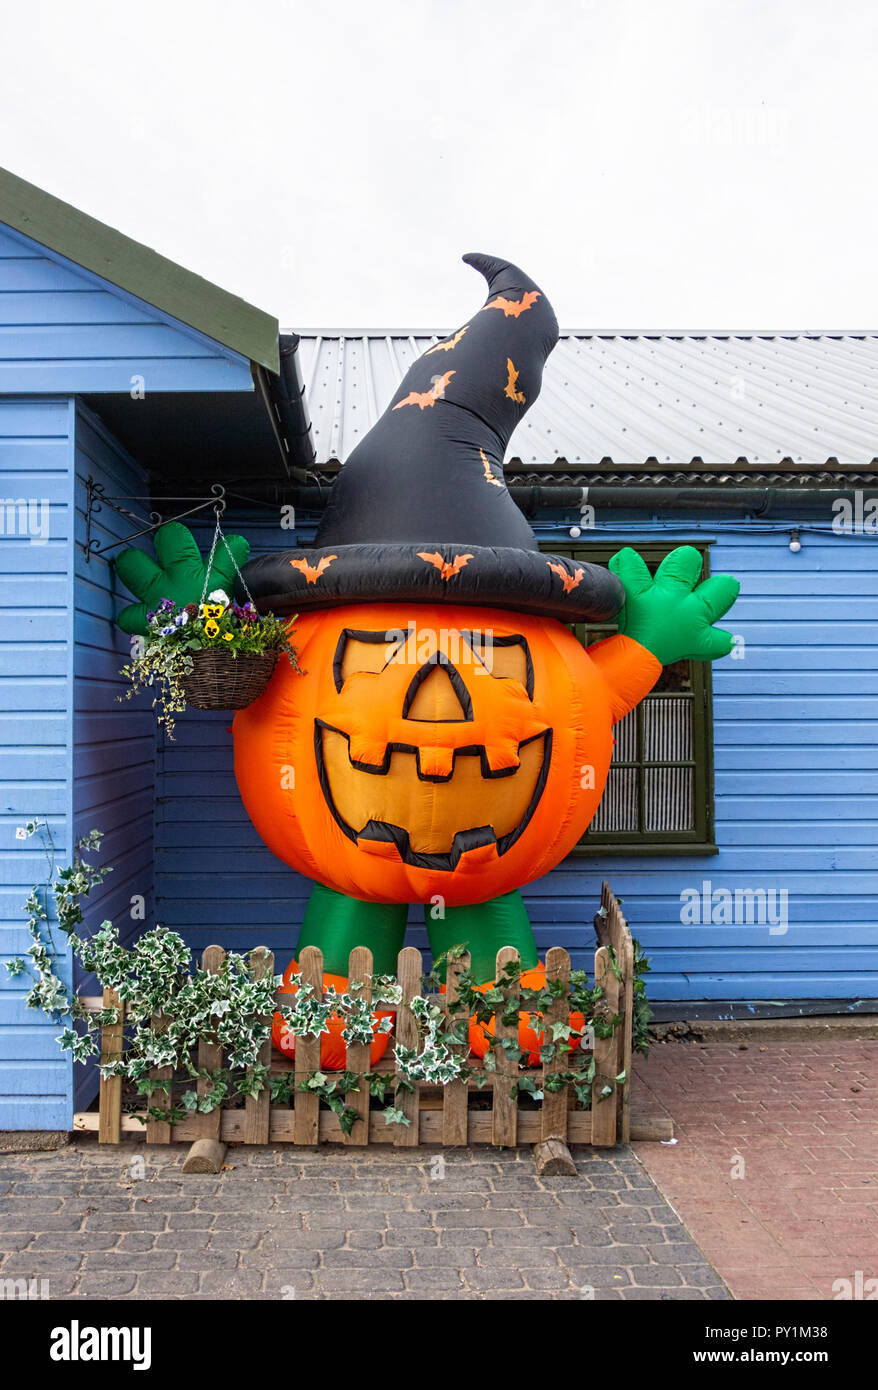 Large inflatable halloween pumpkin in witches hat against blue shed Stock  Photo - Alamy